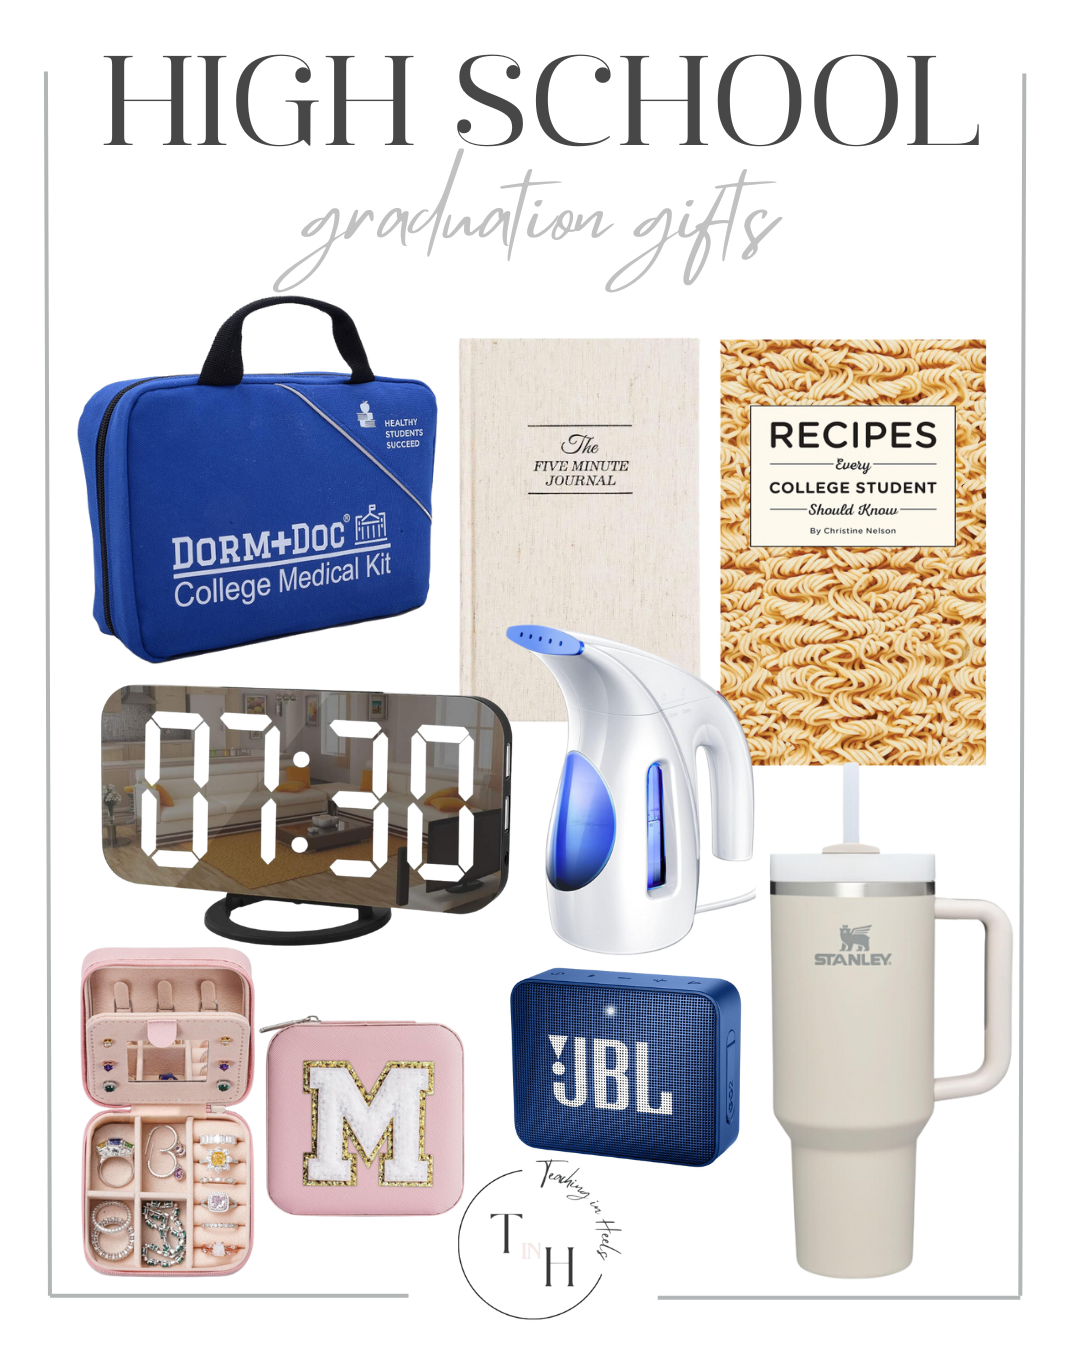 The Ultimate Graduation Gift Guide 2024

Graduation, graduation gifts, gift guide, gifts, grad gifts, seasonal gifts, high school graduation, high school gifts, timer clock, stanley cup, speakers